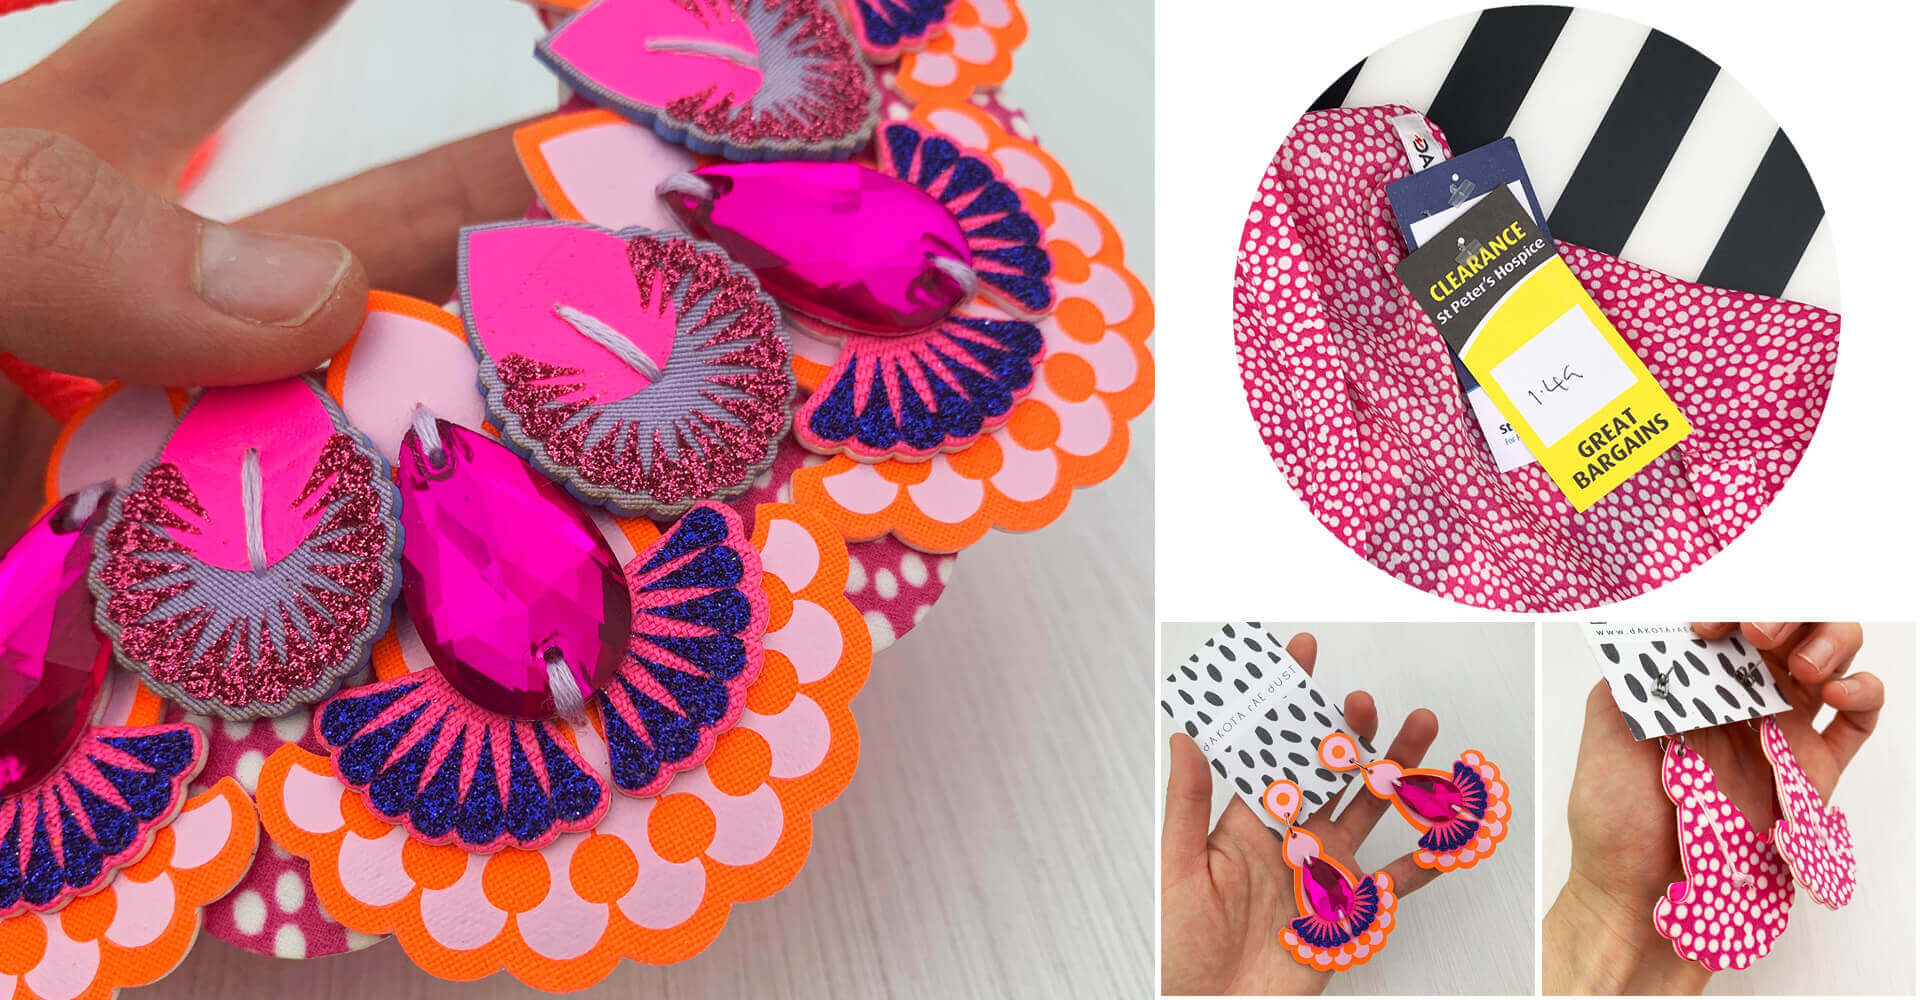 This image is made up of four photographs. On the left a close up of a bright orange and pink, ornately decorative bib necklace. On the right a circlular shaped photograph of the pink polka dot fabric seen in the necklace with a charity shop, discounted price tag attached. Below that are two images of a pair of earrings in teh same style and colour palette, one from the front and one from behind. They also feature the pink polka dot fabric